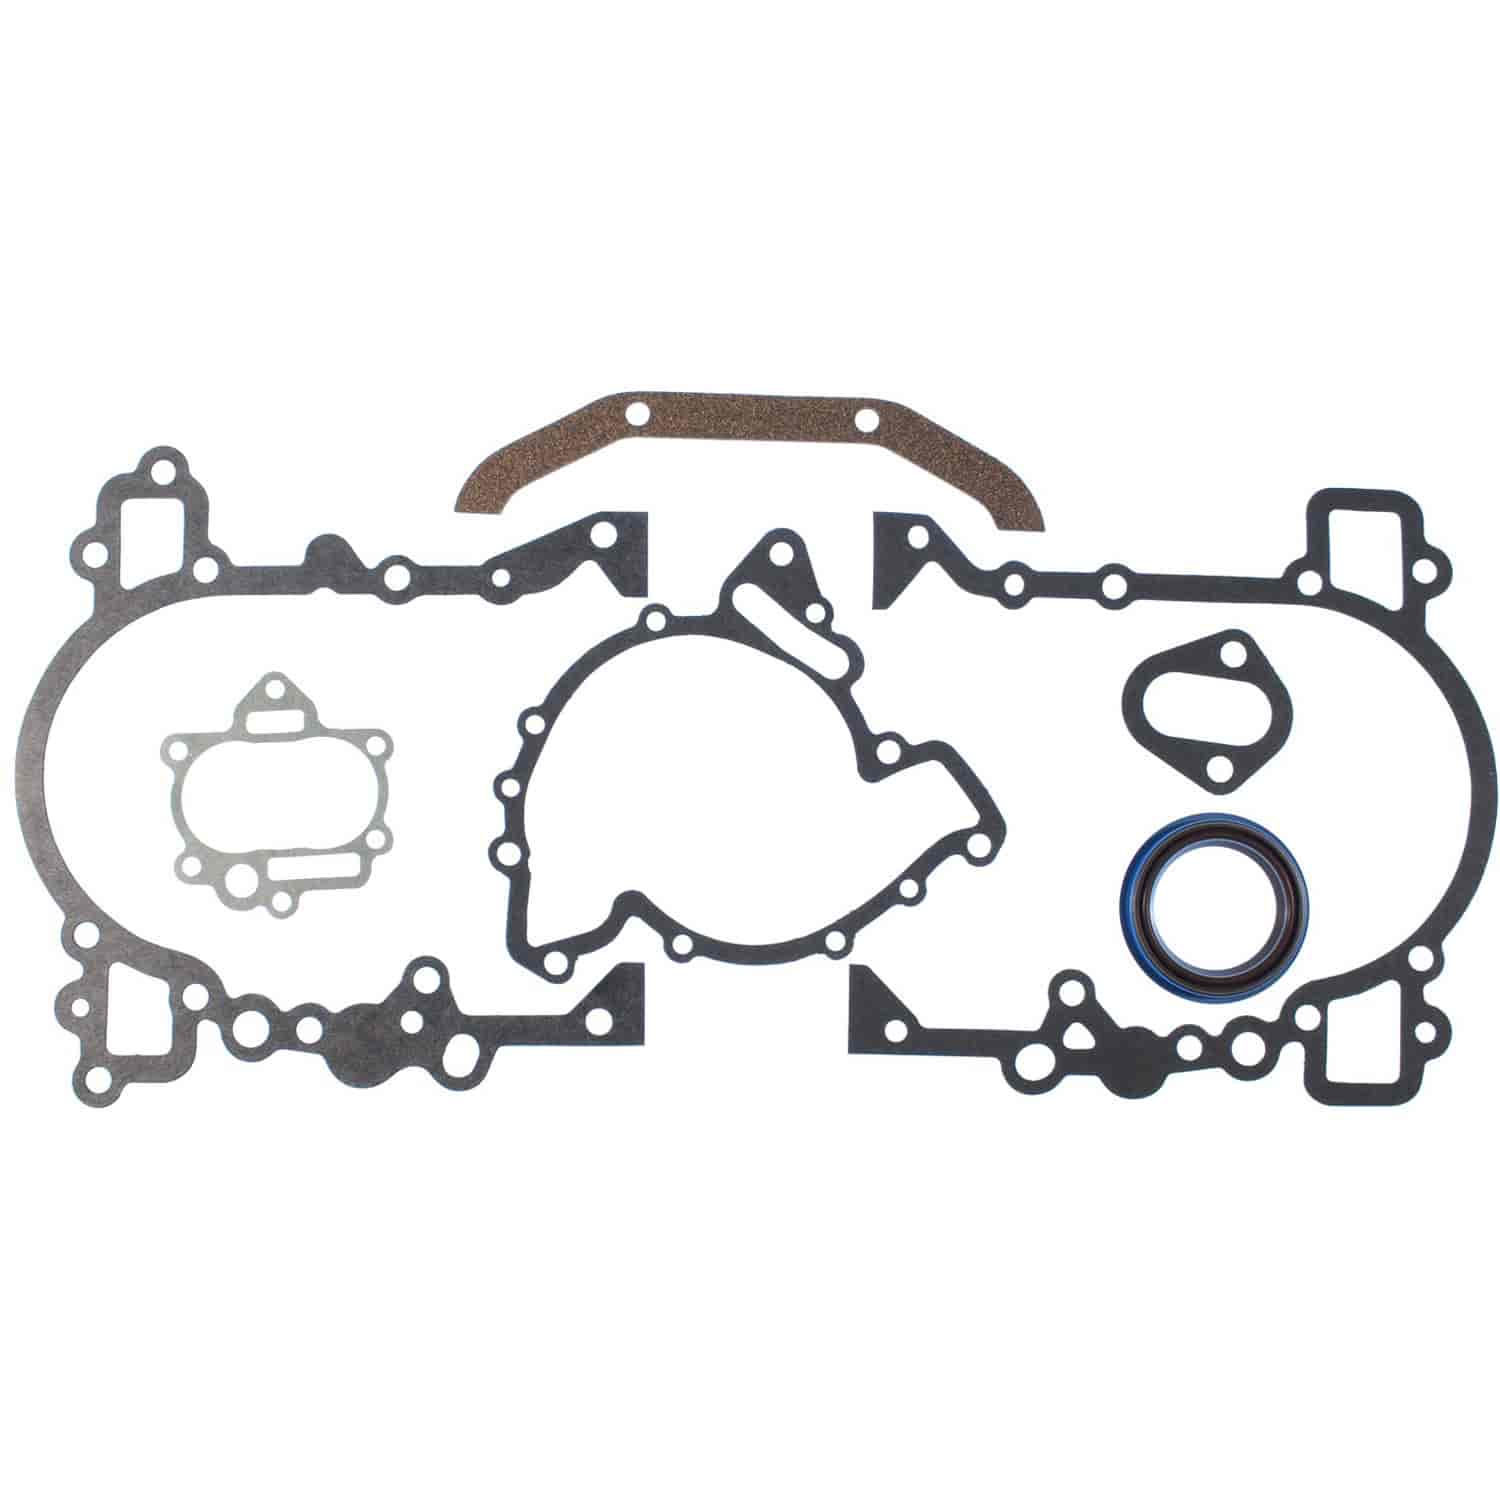 Timing Cover Set Bui 225 300 340 Engs.w/Superflex Seal 64-67